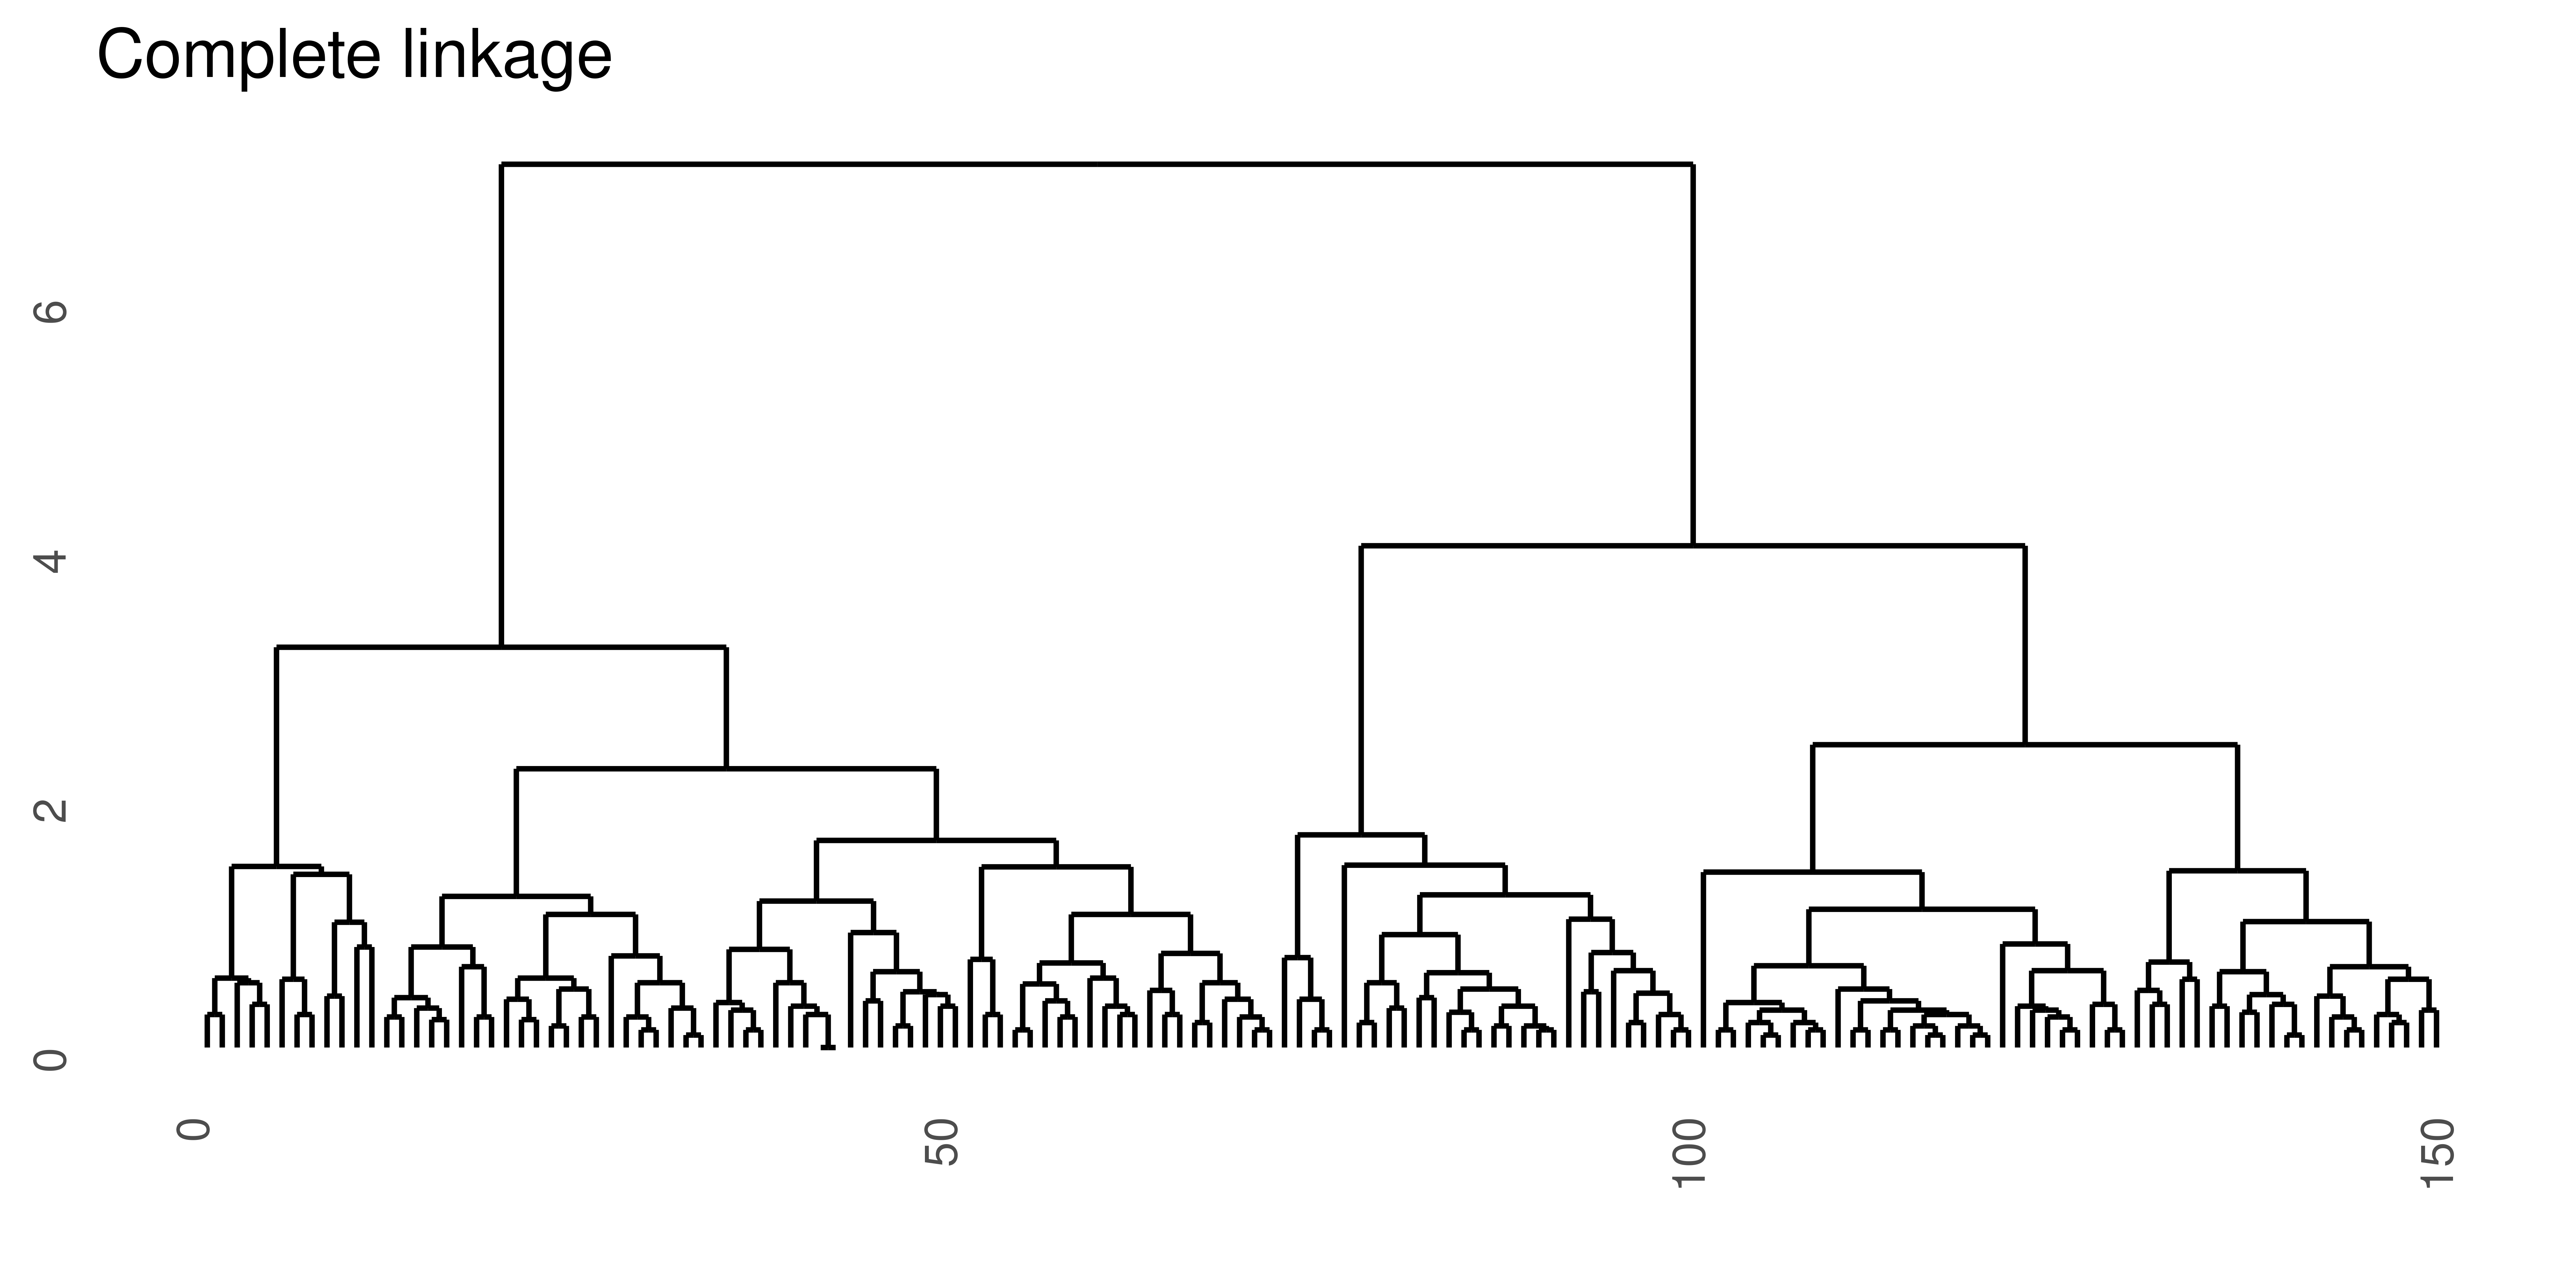 Hierarchical clustering of the same data set using Euclidean distance and four different linkage methods.